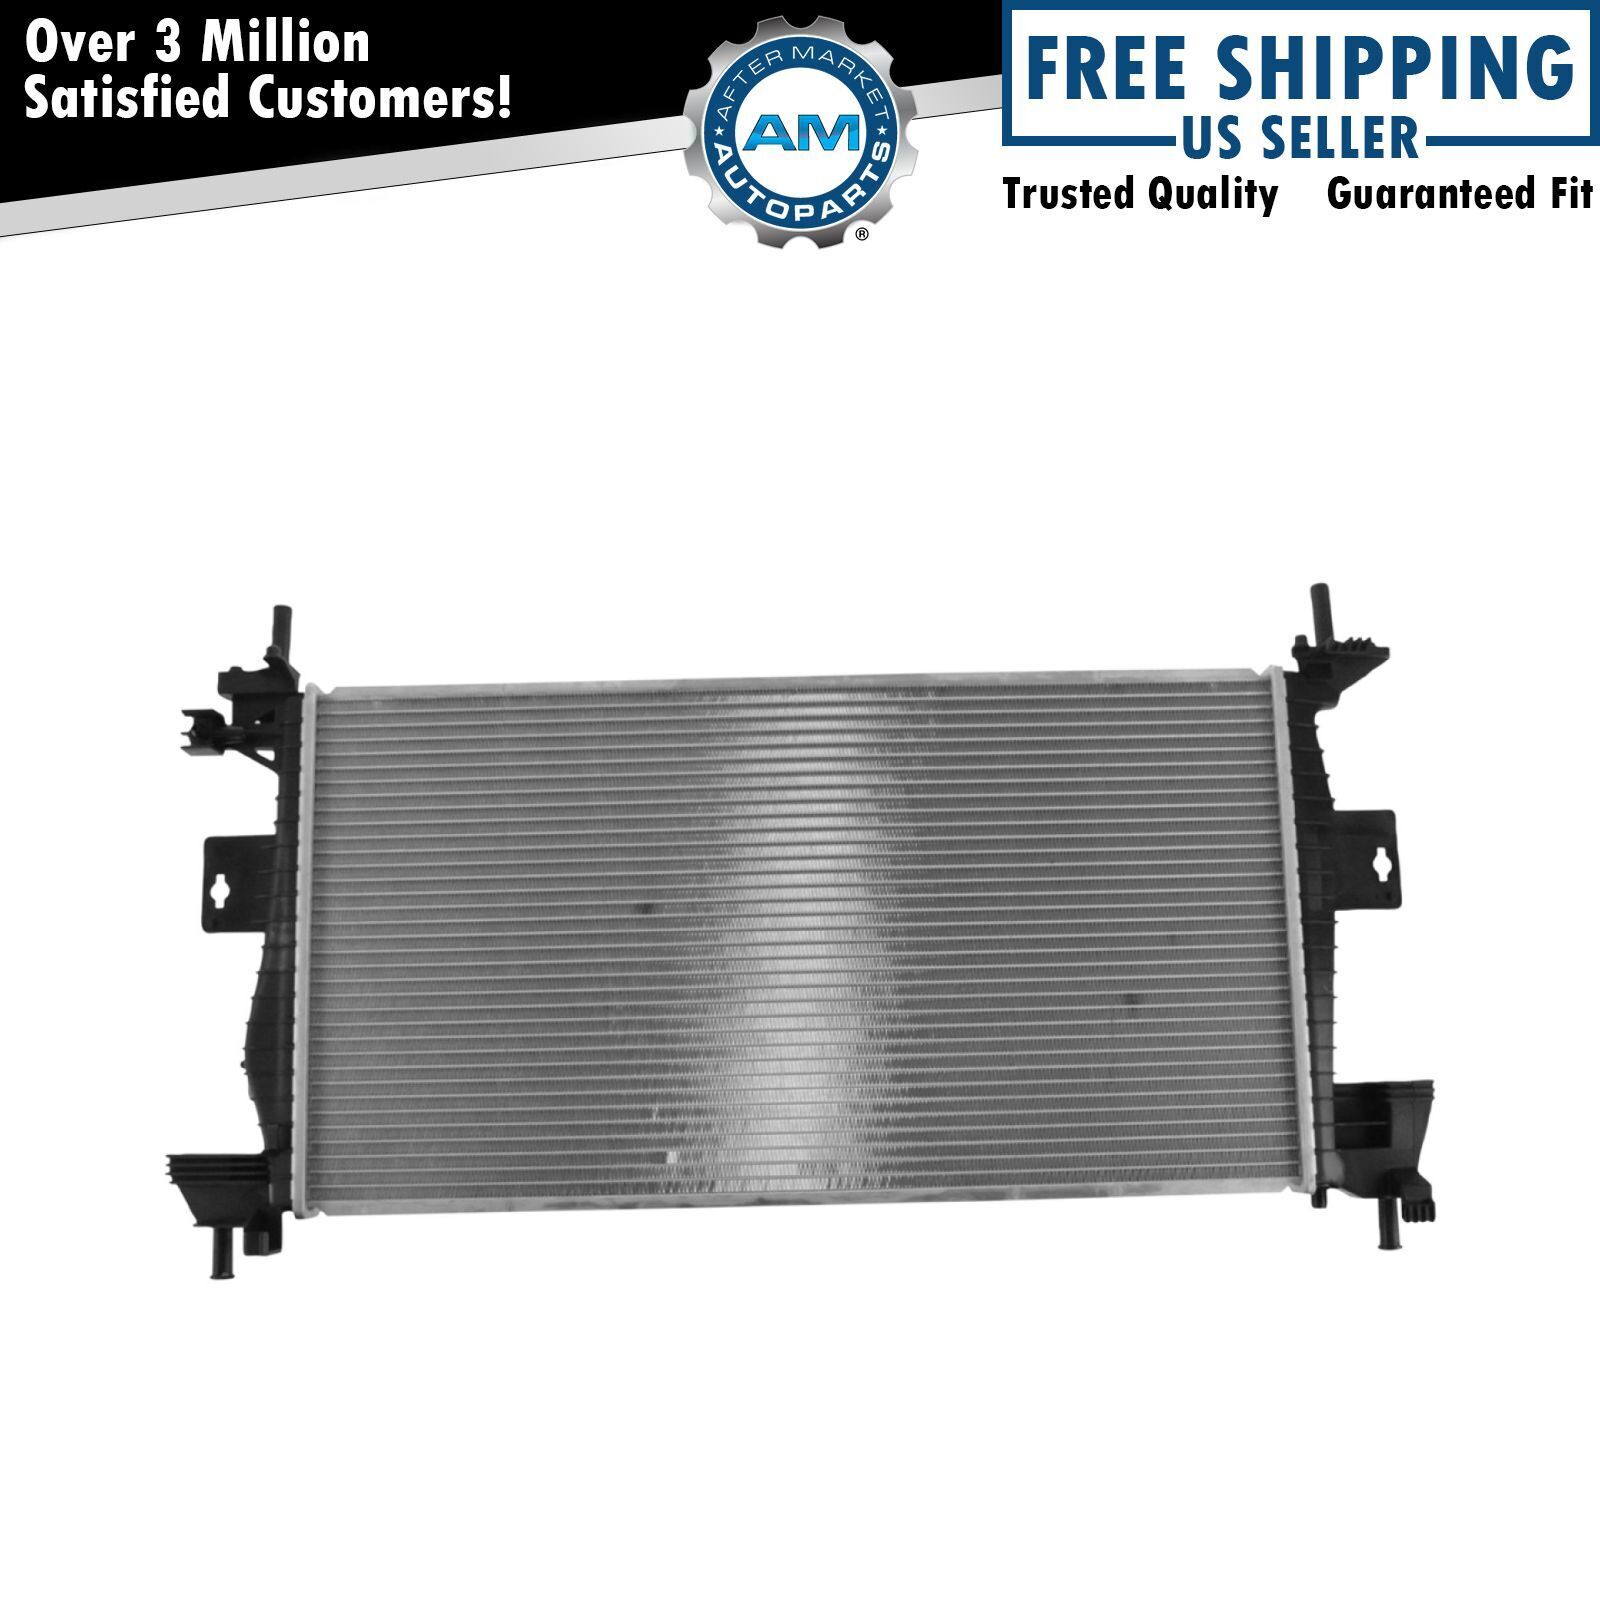 Radiator Assembly Fits 2012-2018 Ford Focus